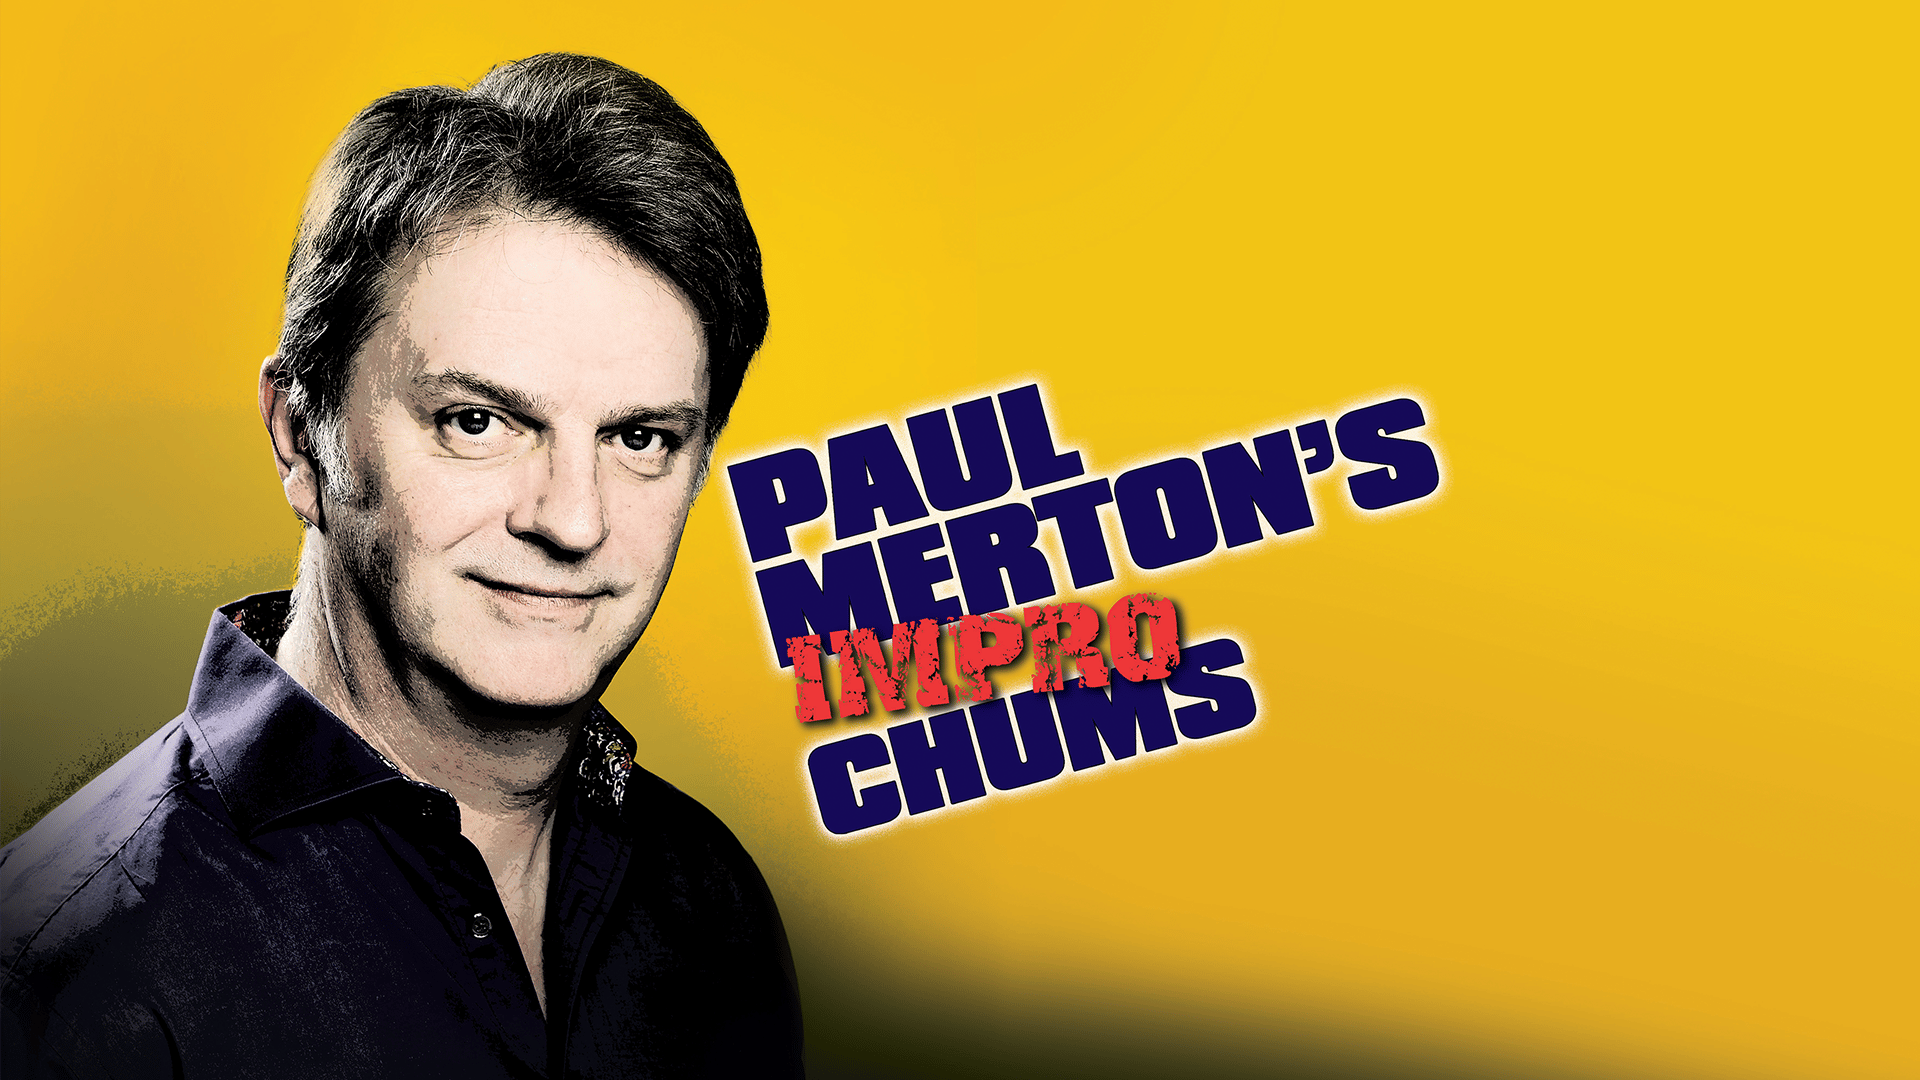 Image of Paul Merton with the text 'Paul Merton's Impro Chums'